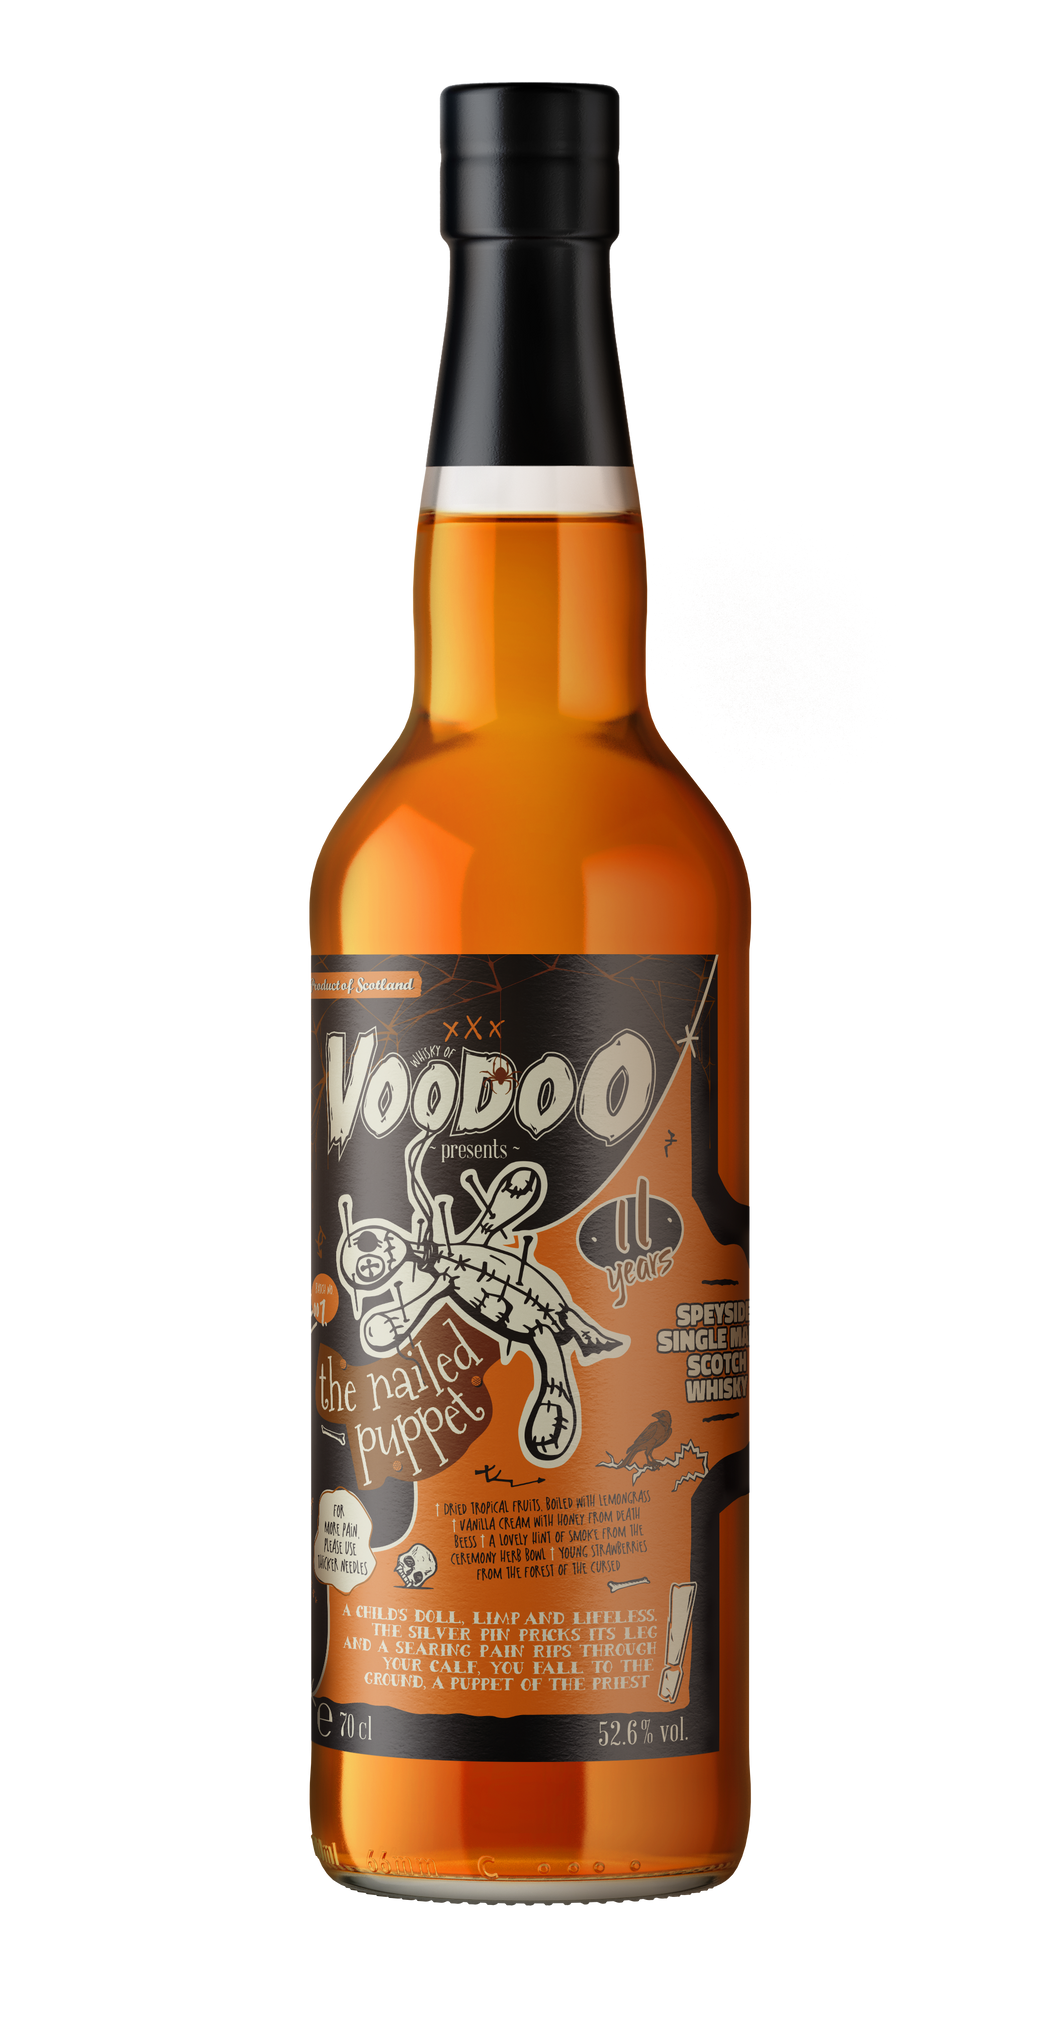 The Nailed Puppet 11 Year Old - Whisky of Voodoo